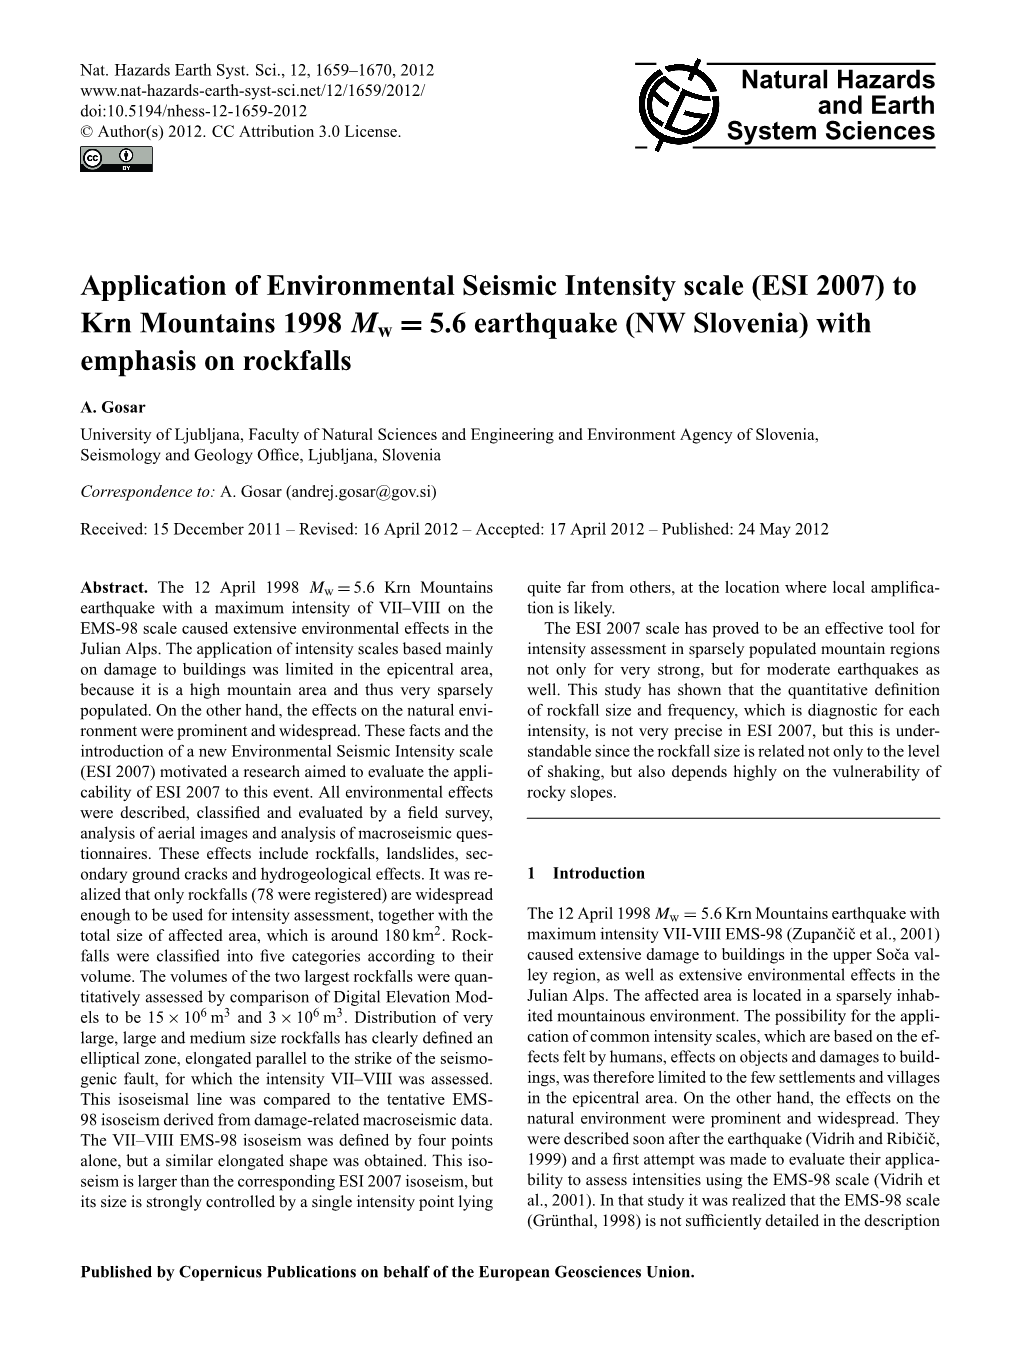 Application of Environmental Seismic Intensity Scale (ESI 2007) to Krn Mountains 1998 Mw = 5.6 Earthquake (NW Slovenia) with Emphasis on Rockfalls